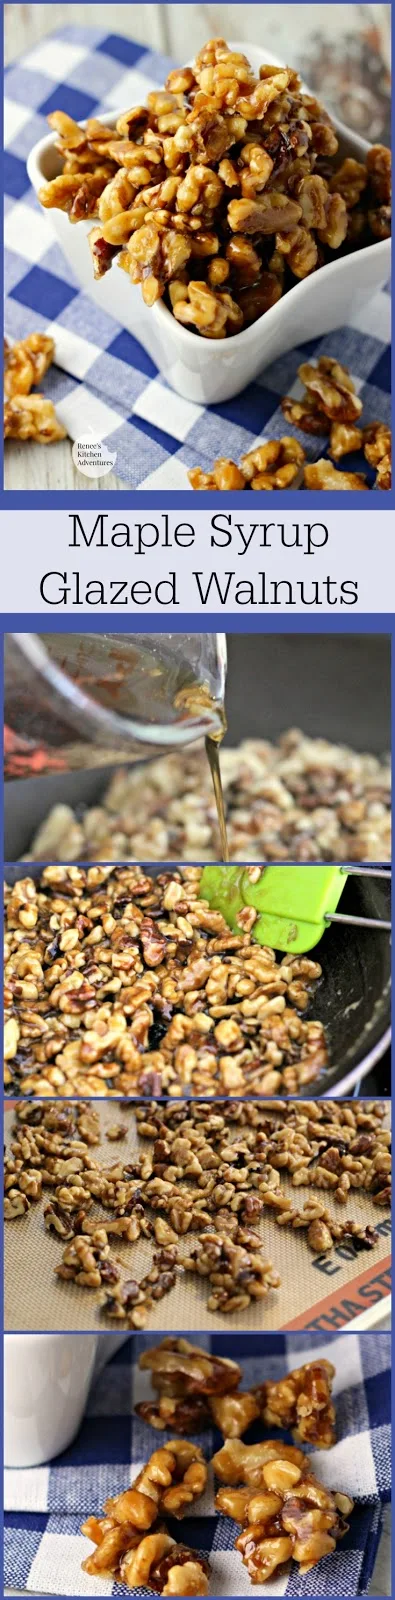 Maple Syrup Glazed Walnuts | Renee's Kitchen Adventures: quick, healthy and utterly delicious snack for anytime!